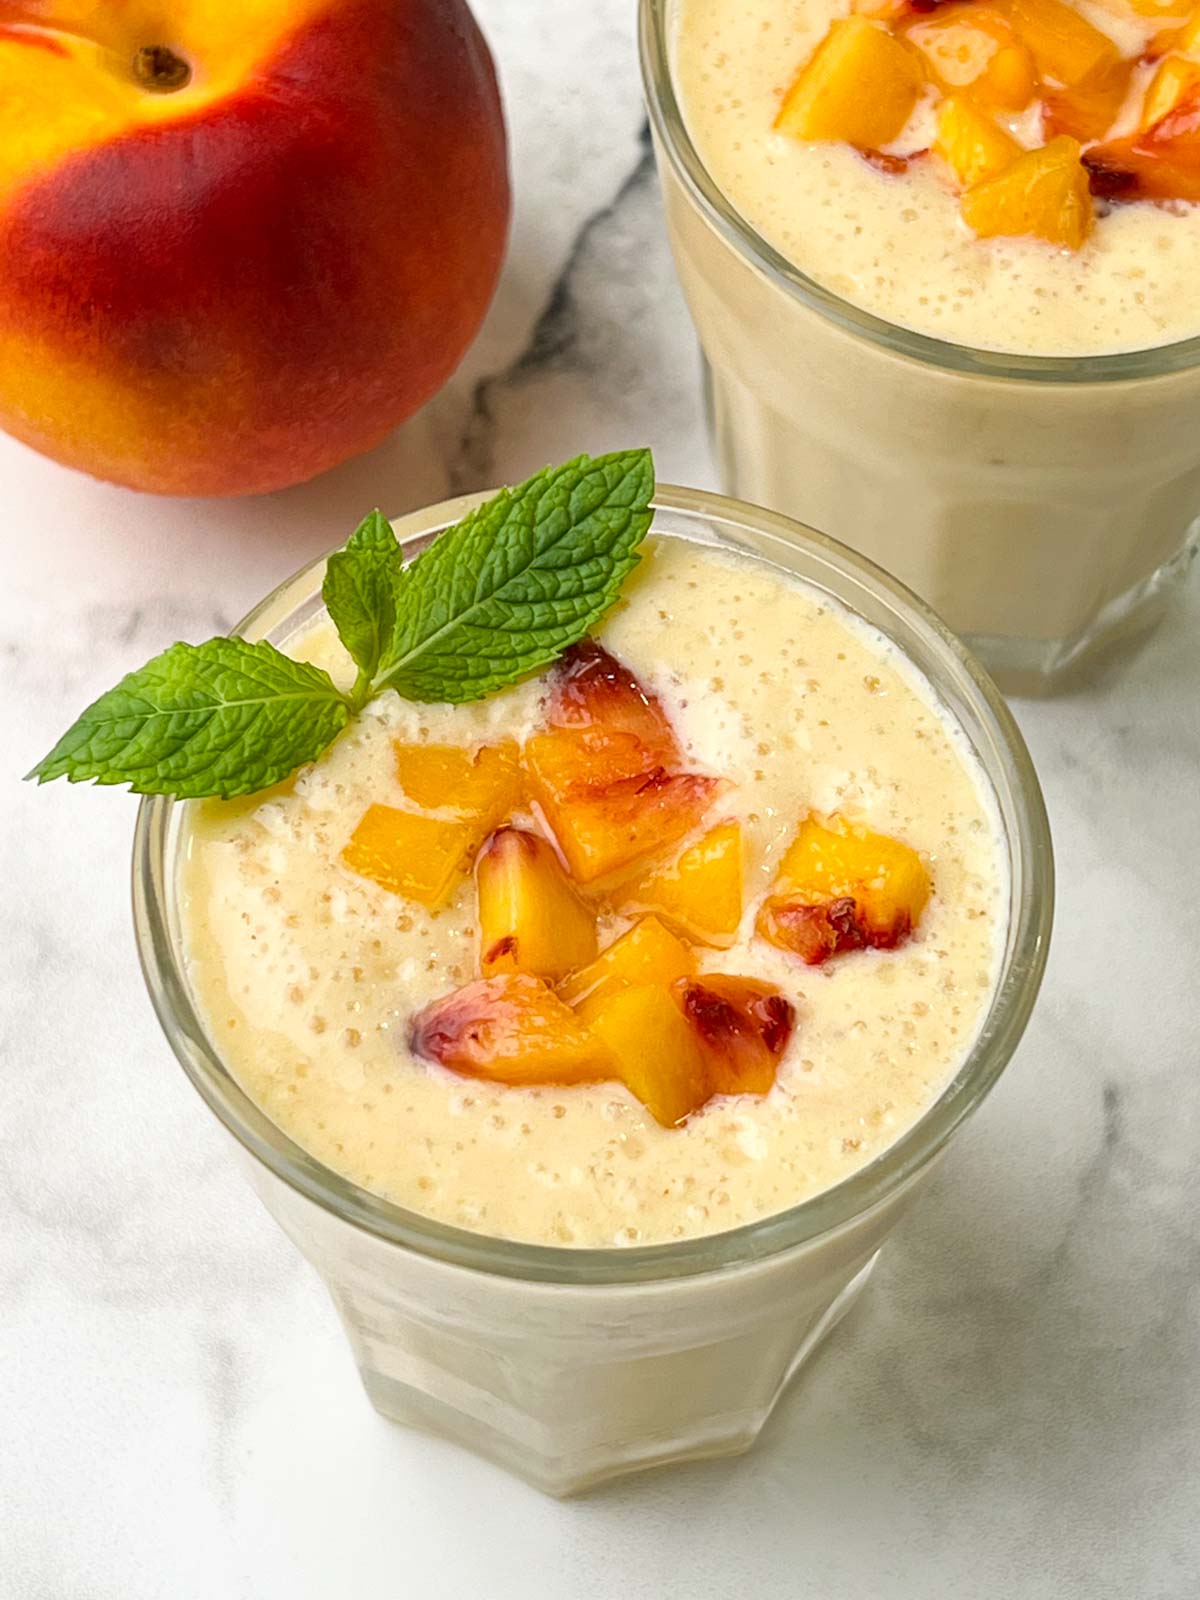 peach banana smoothie served in juice serving glasses topped with chopped yellow peach pieces and garnished with mint leaf